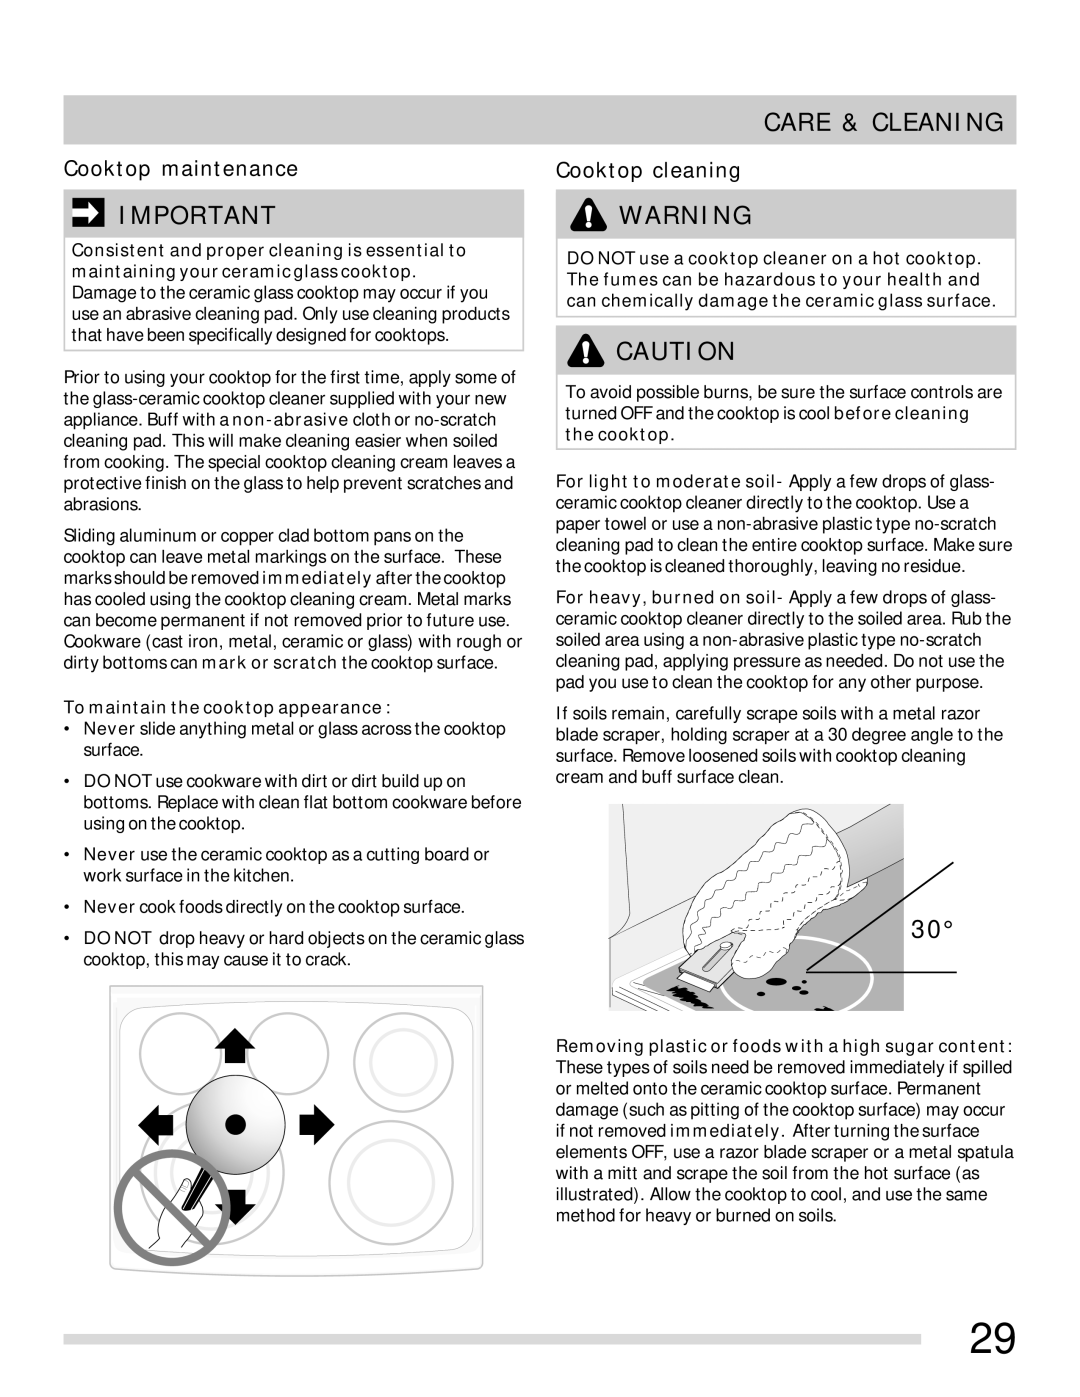 Frigidaire 316902315 important safety instructions Cooktop maintenance, Cooktop cleaning, Care & Cleaning 